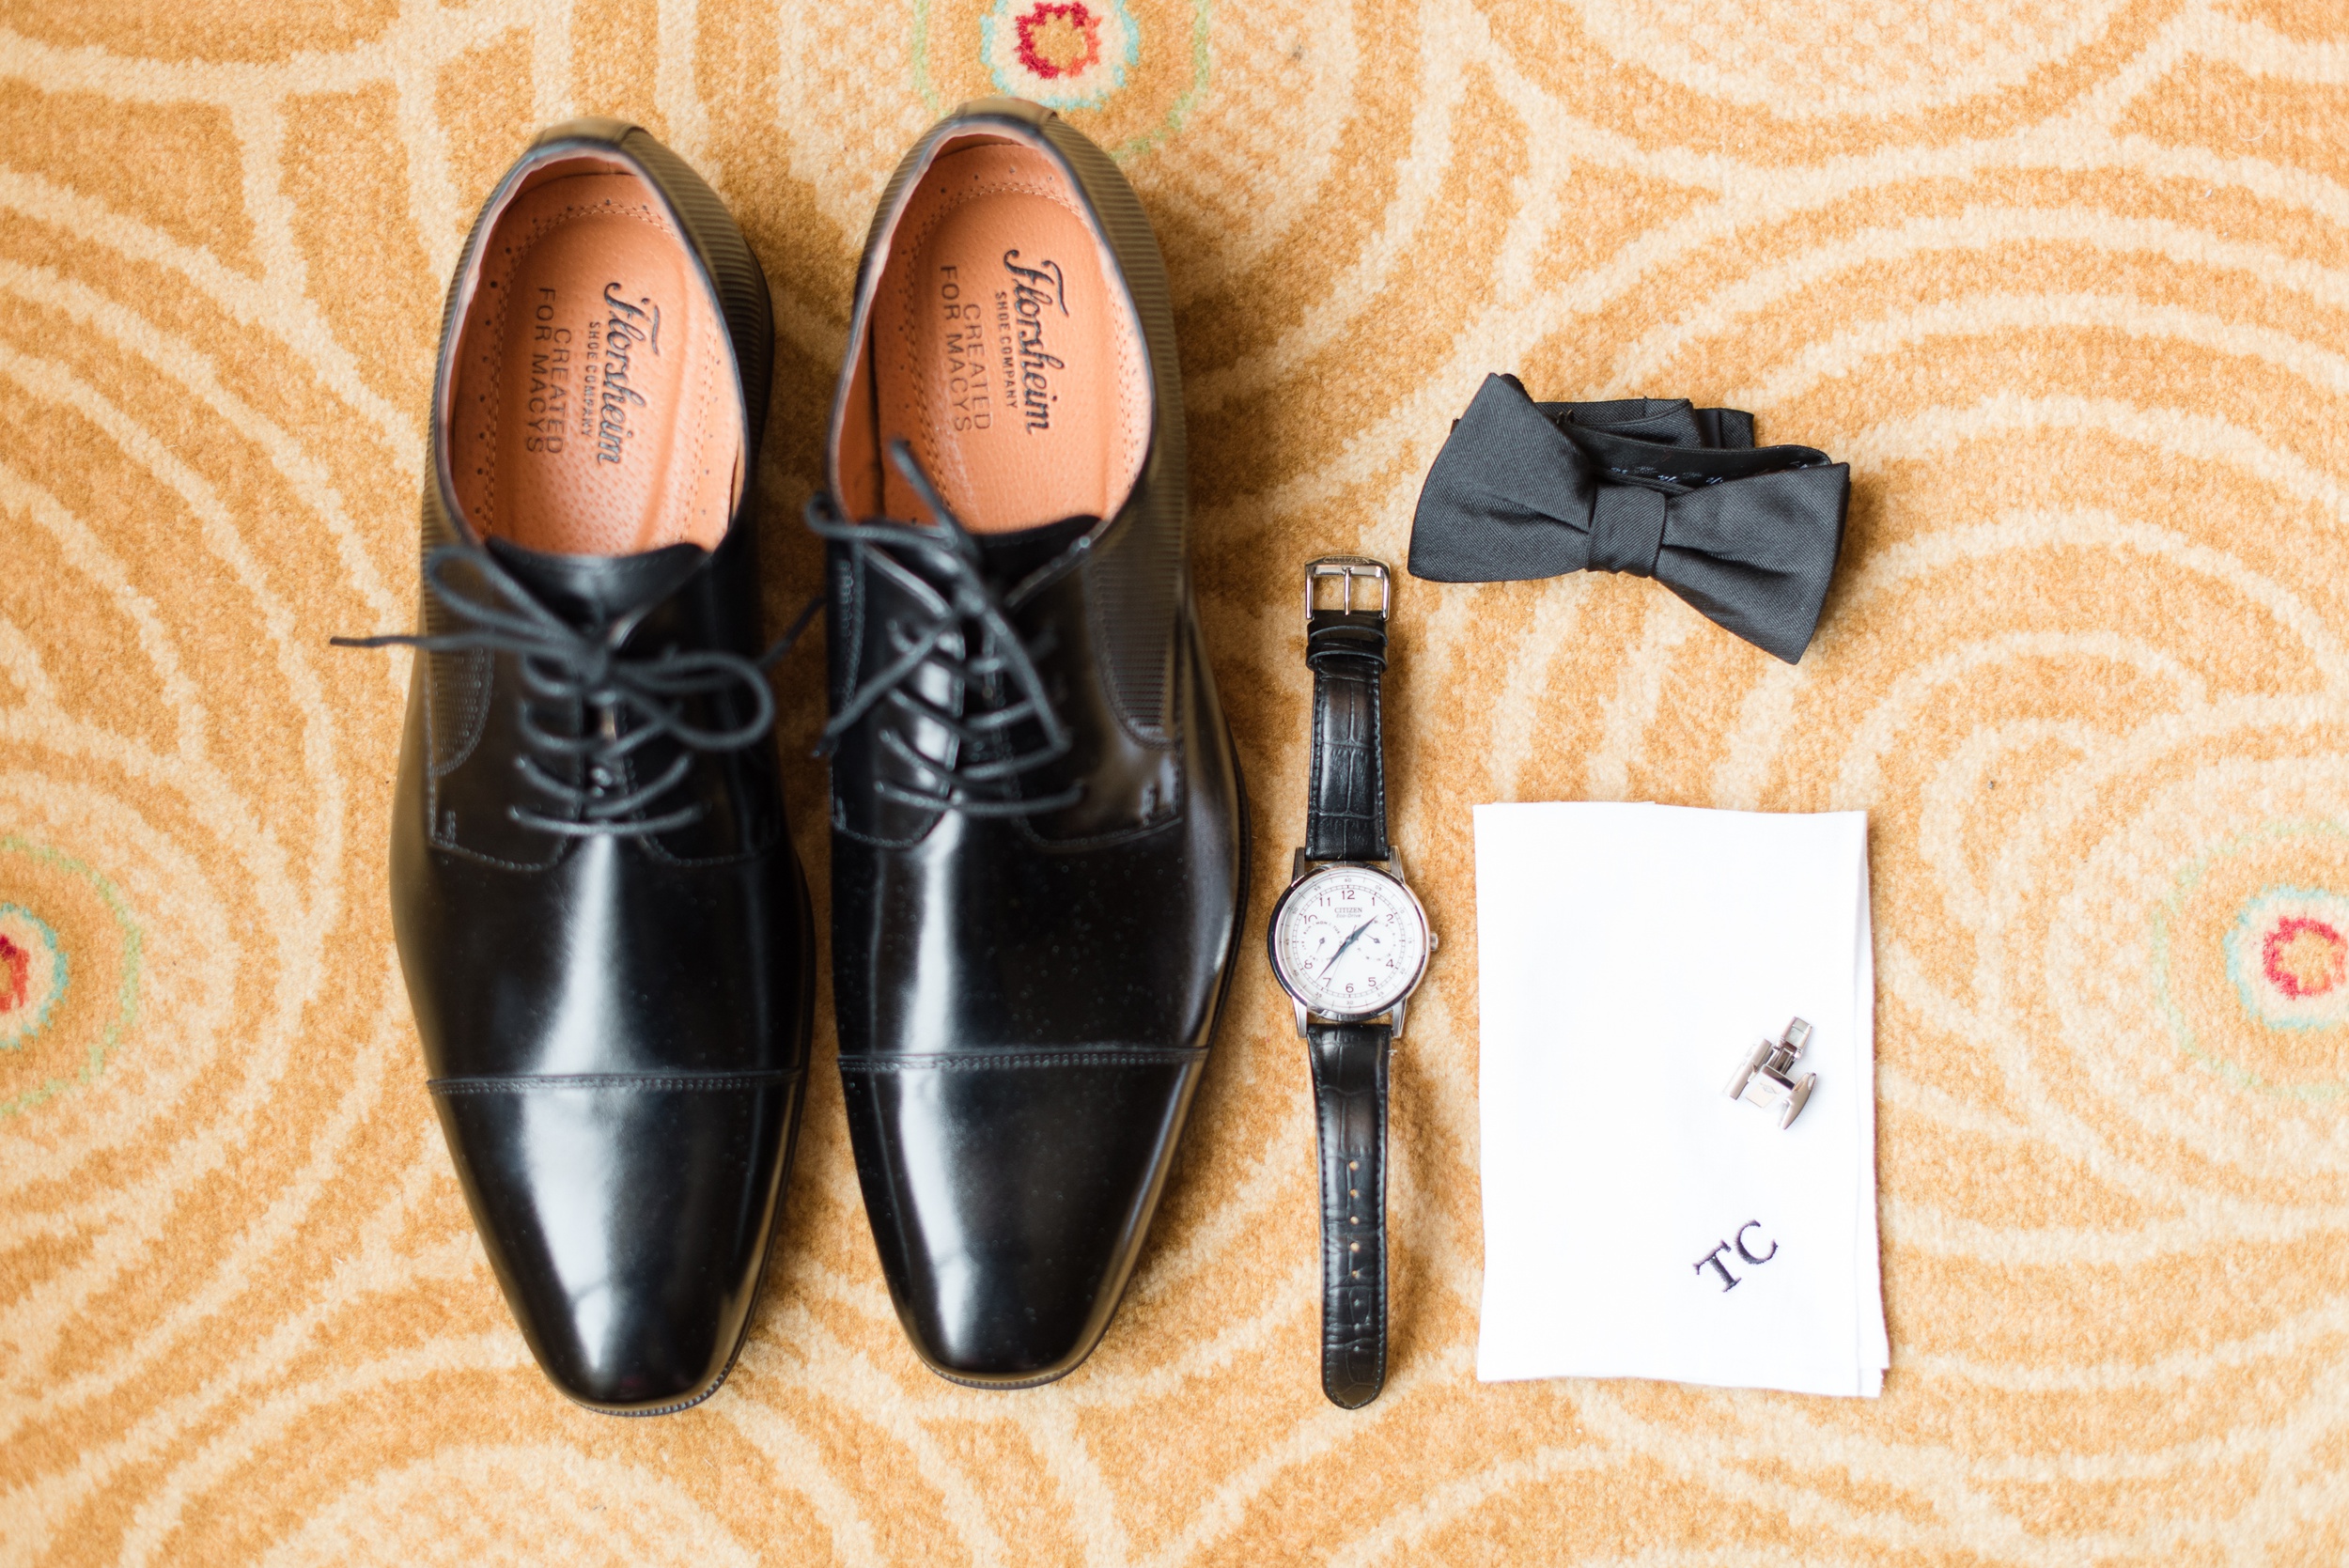 Details of a groom's black shoes, bowtie and watch sit on an orange rug together